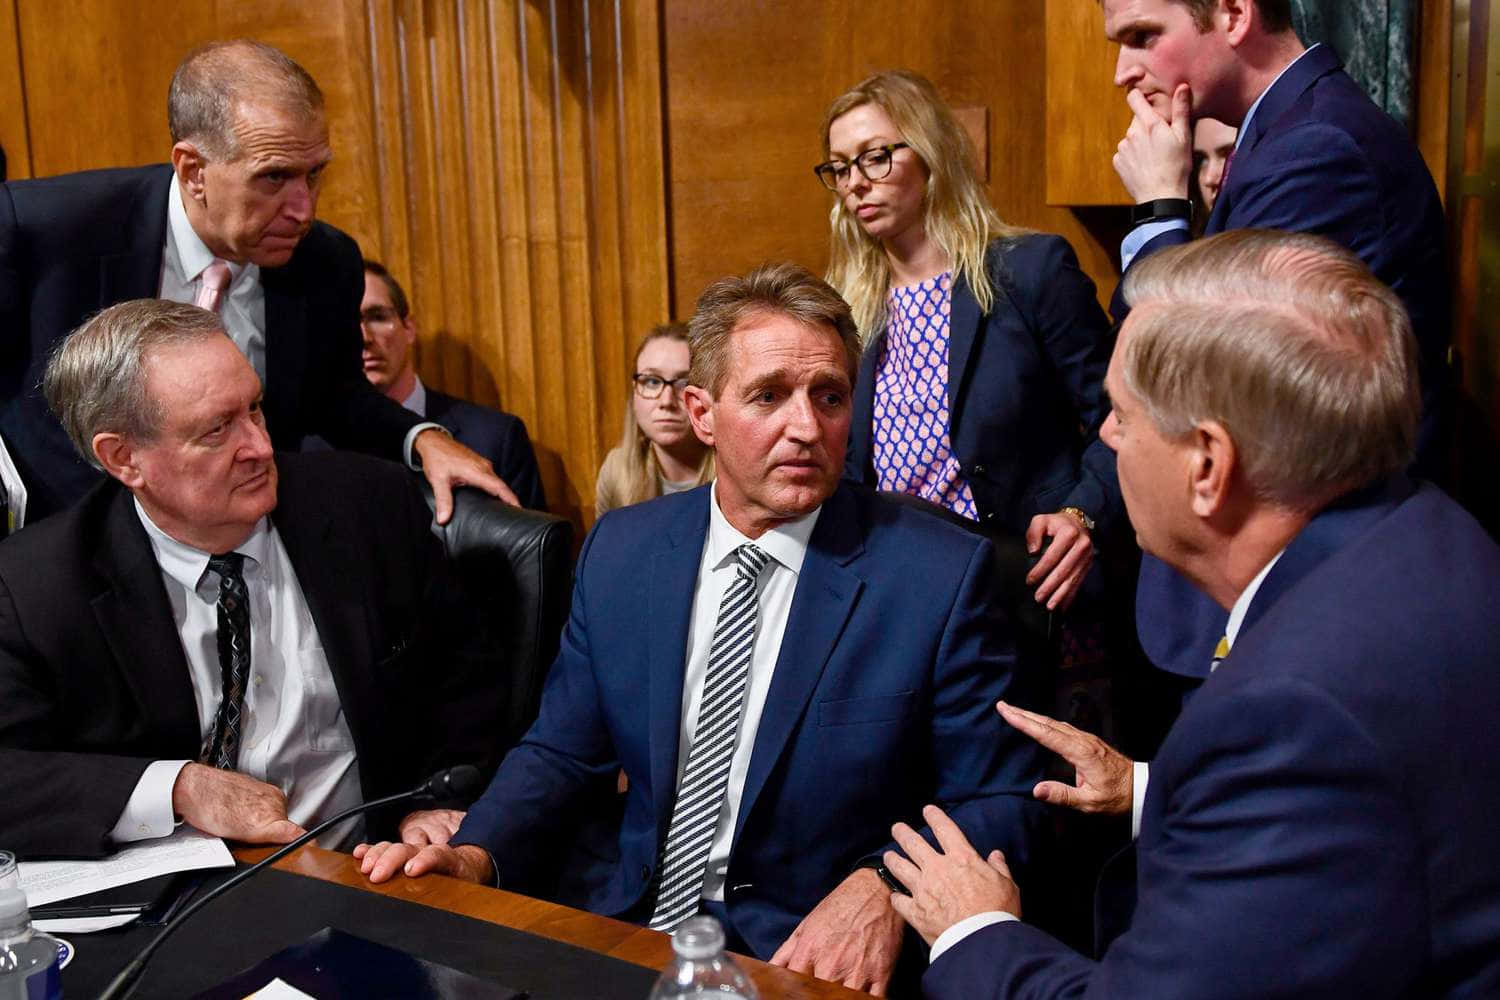 Jeff Flake engaging in a political discussion Wallpaper